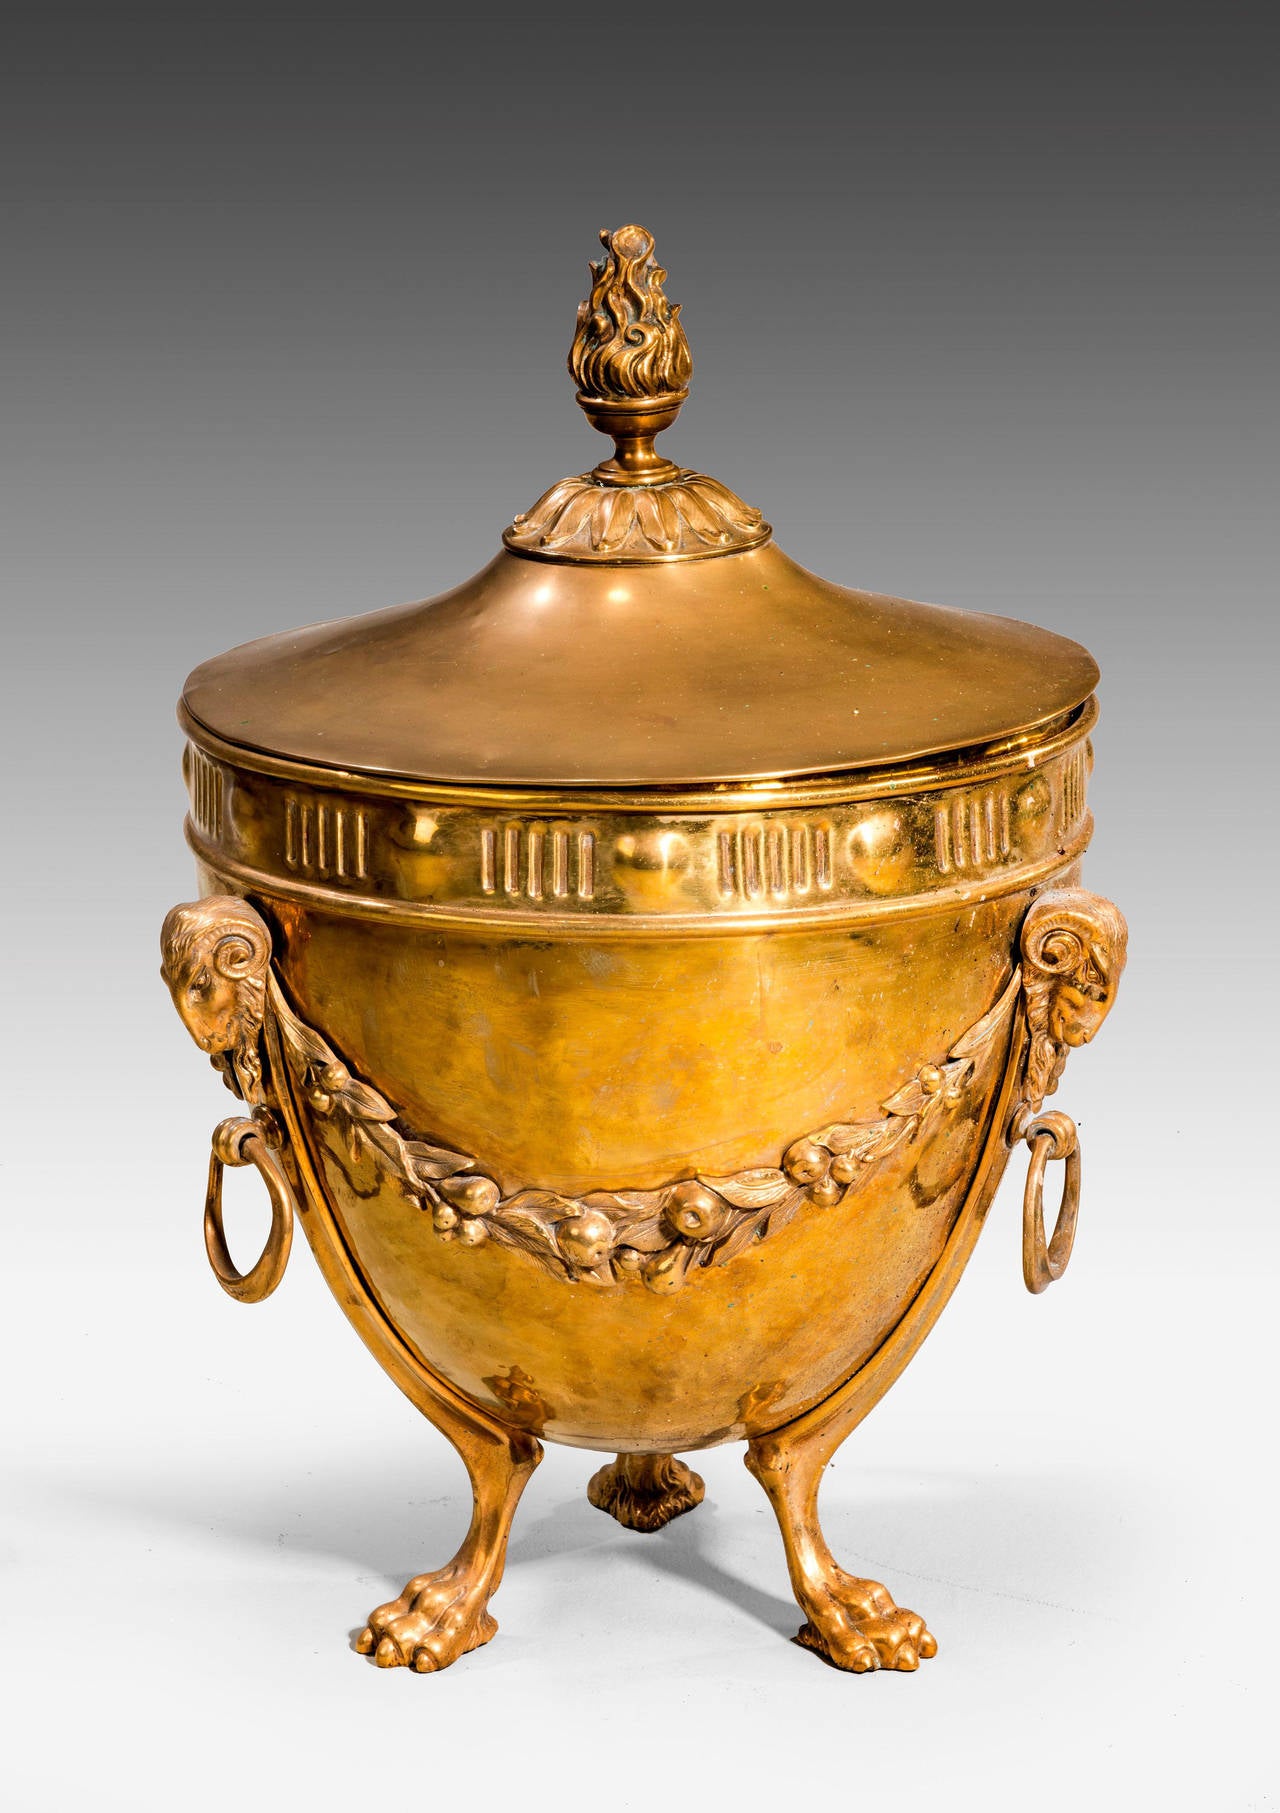 A circular 19th century coal container showing influences of Robert Adam. The main body with swags of plums and foliage. Rams heads to the top sections of the curved supports, ending in hairy paws. The top domed with flambé finials.